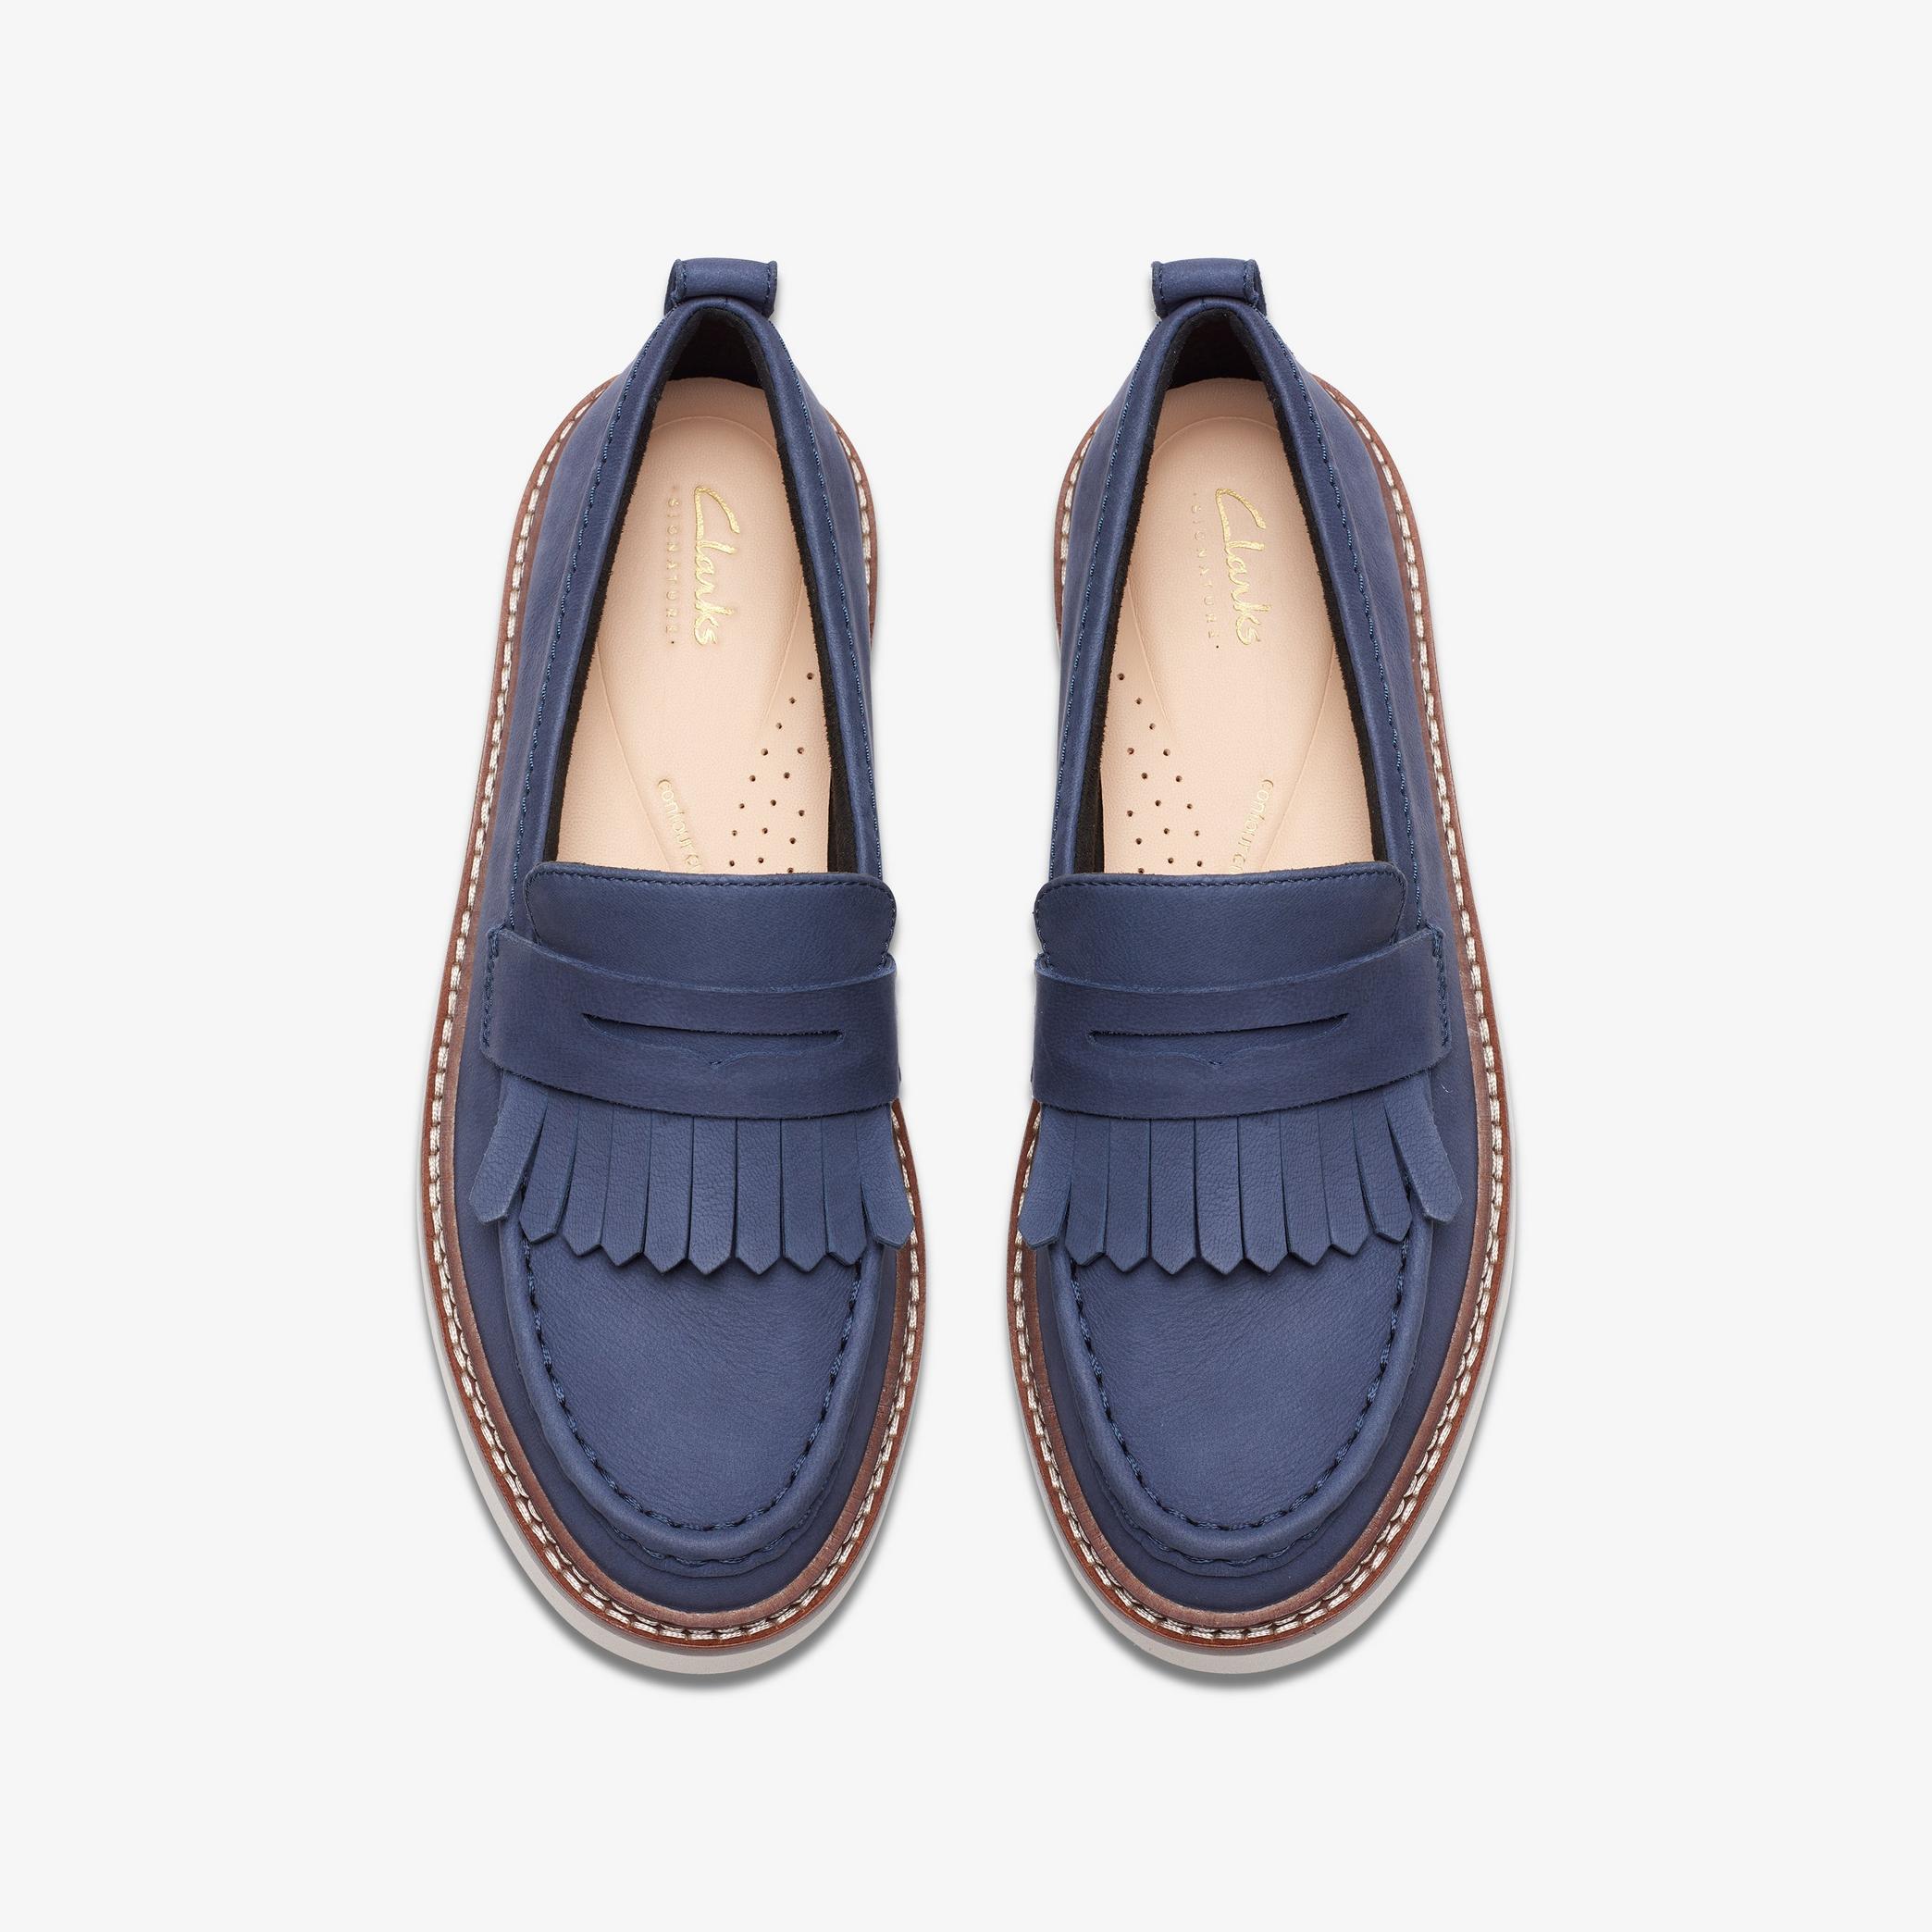 Orianna Loafer Navy Nubuck Loafers, view 8 of 11